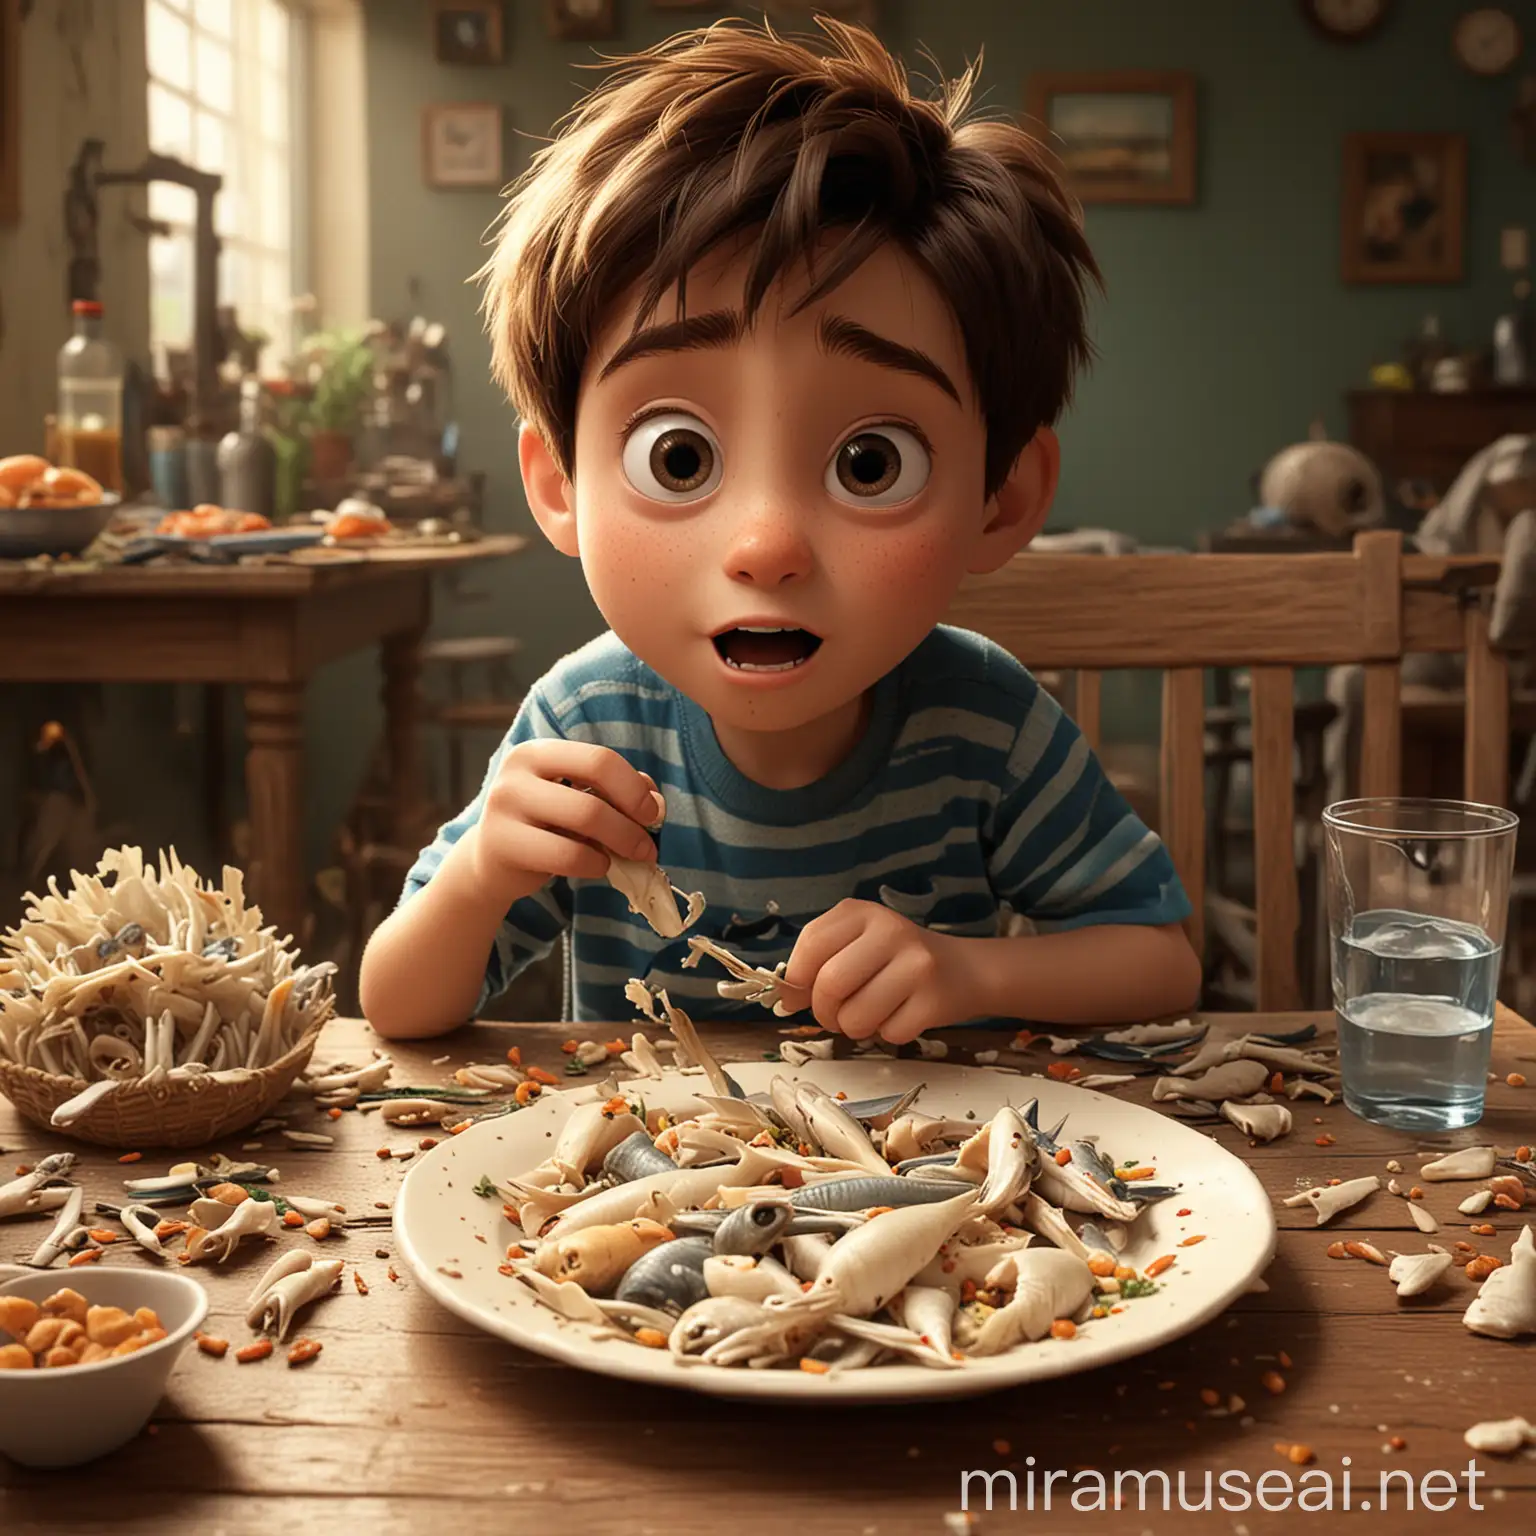 Boy Eating Fish with Scattered Bones Pixar Style